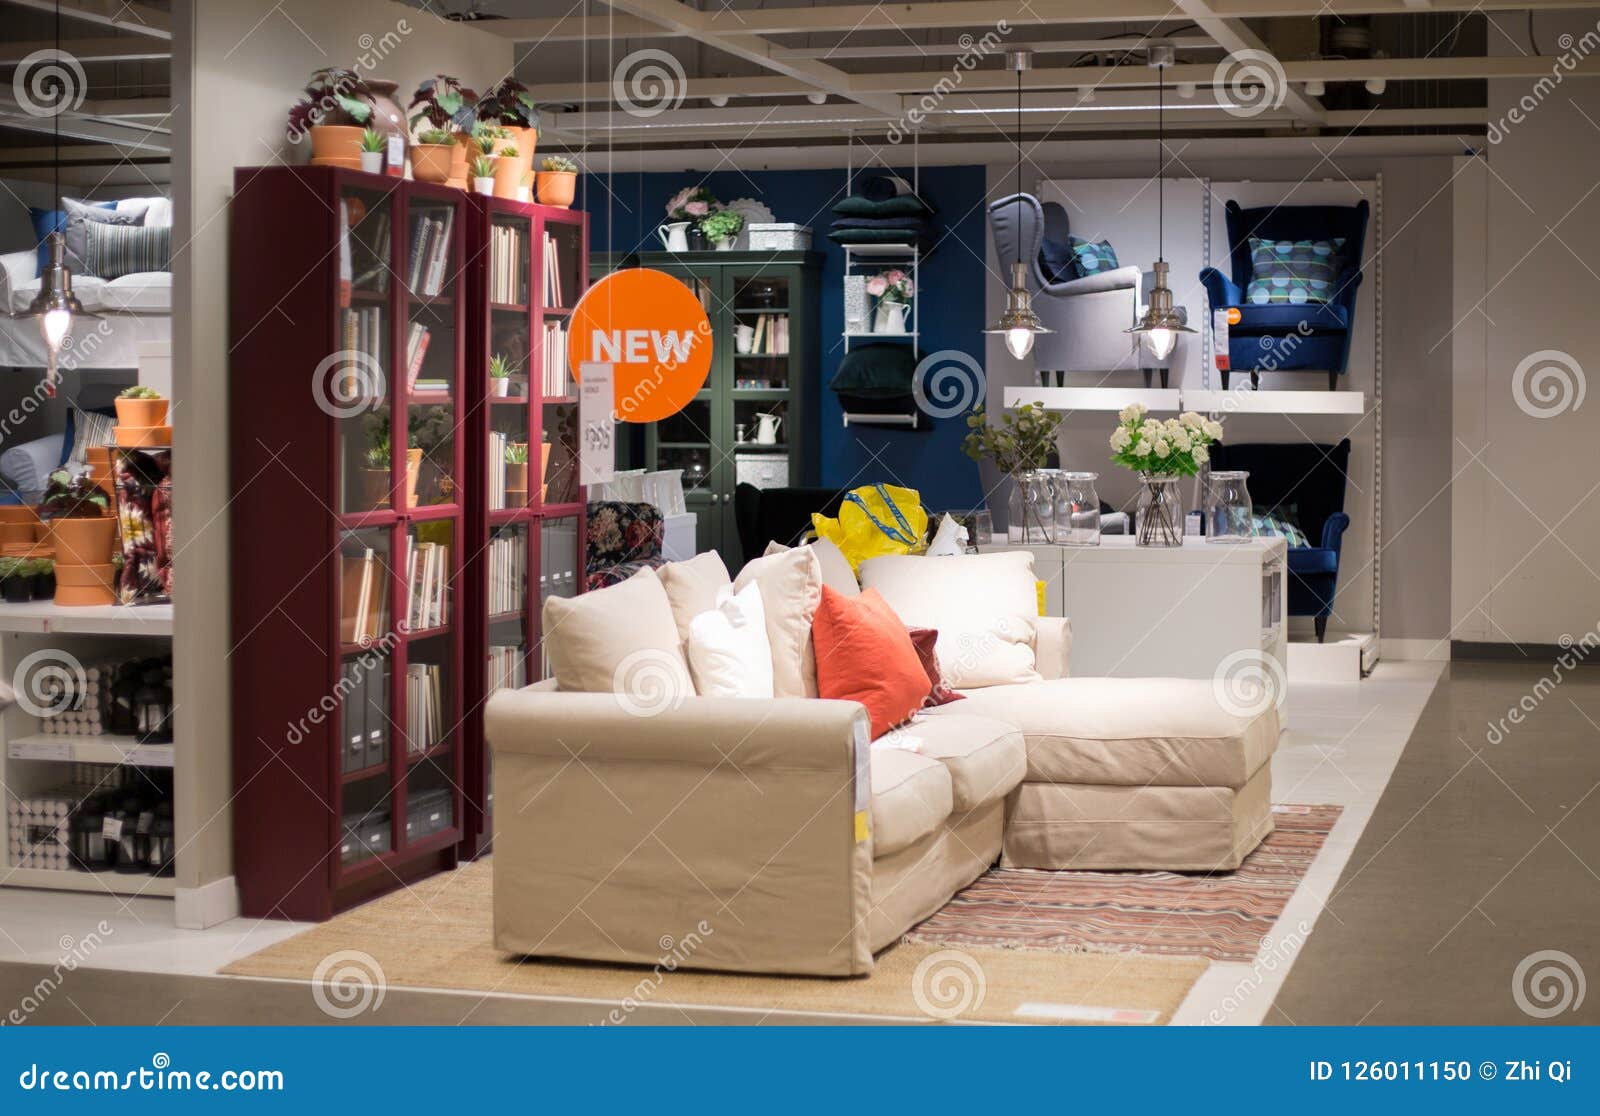 A Sample Of The Interior In Ikea Store Shop Discount 50 Price Off